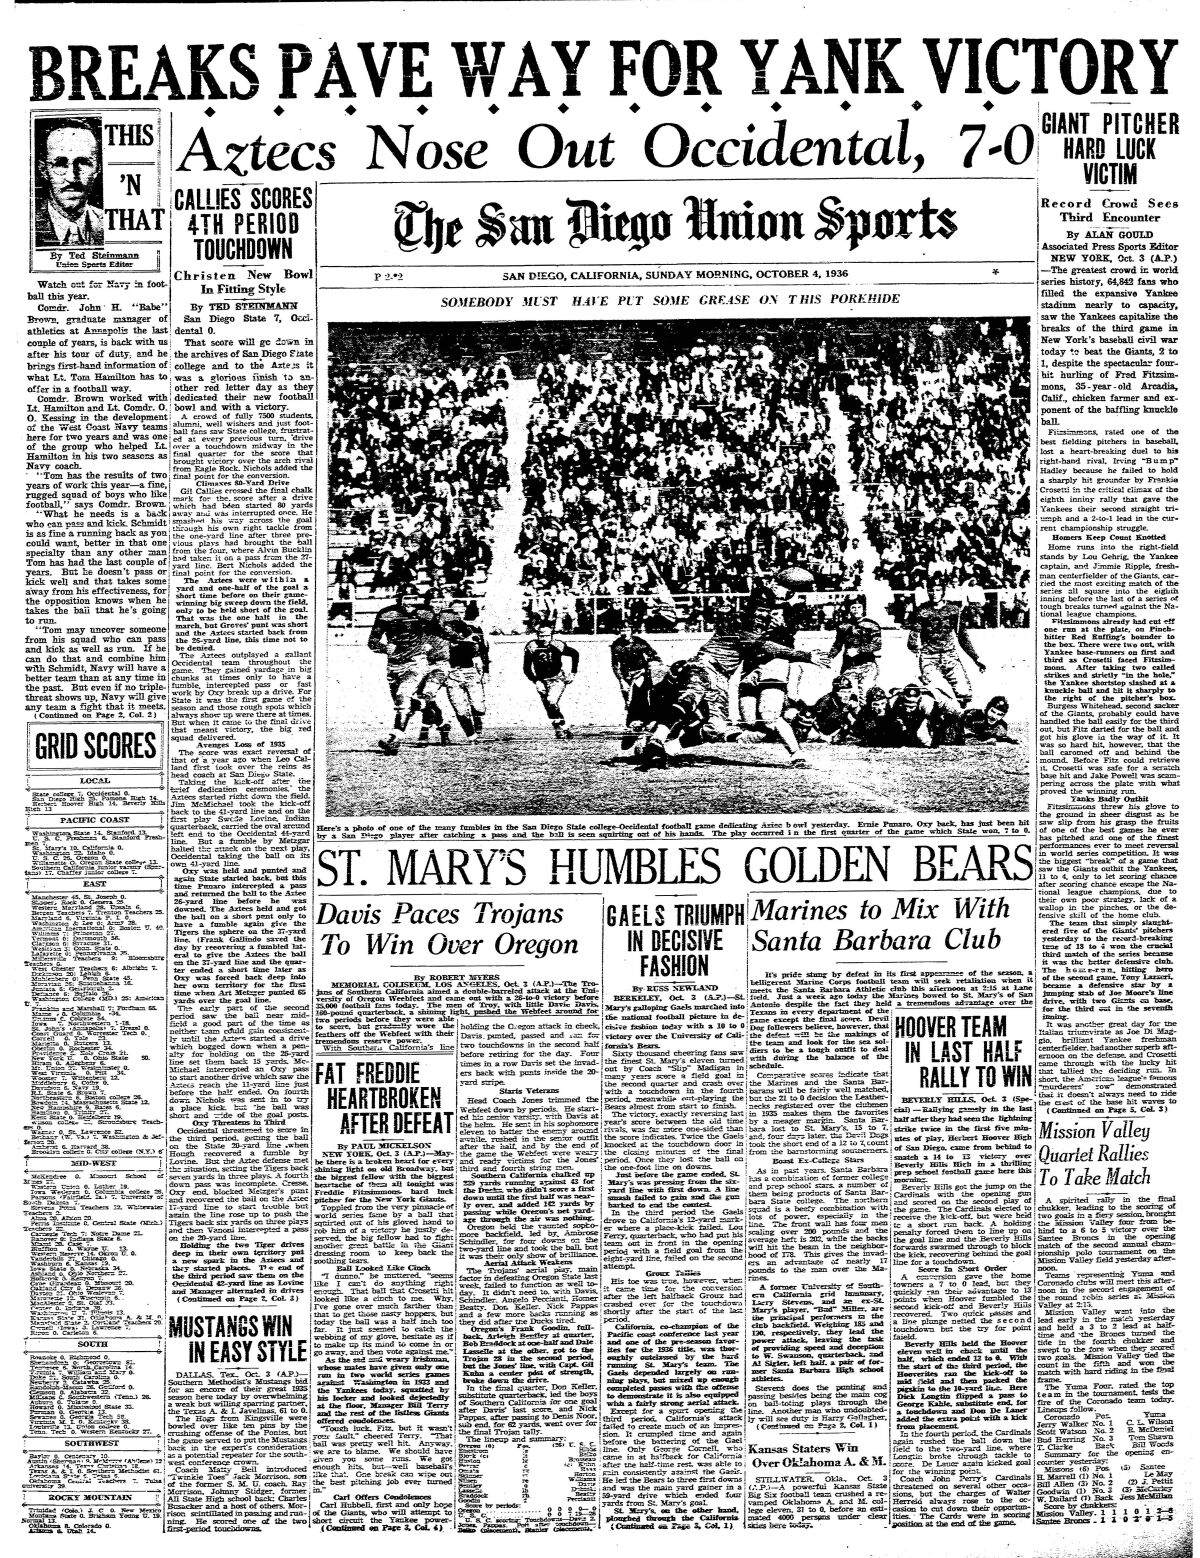 "Aztecs Nose Out Occidental, 7-0"   Union Sports page Oct. 4, 1936